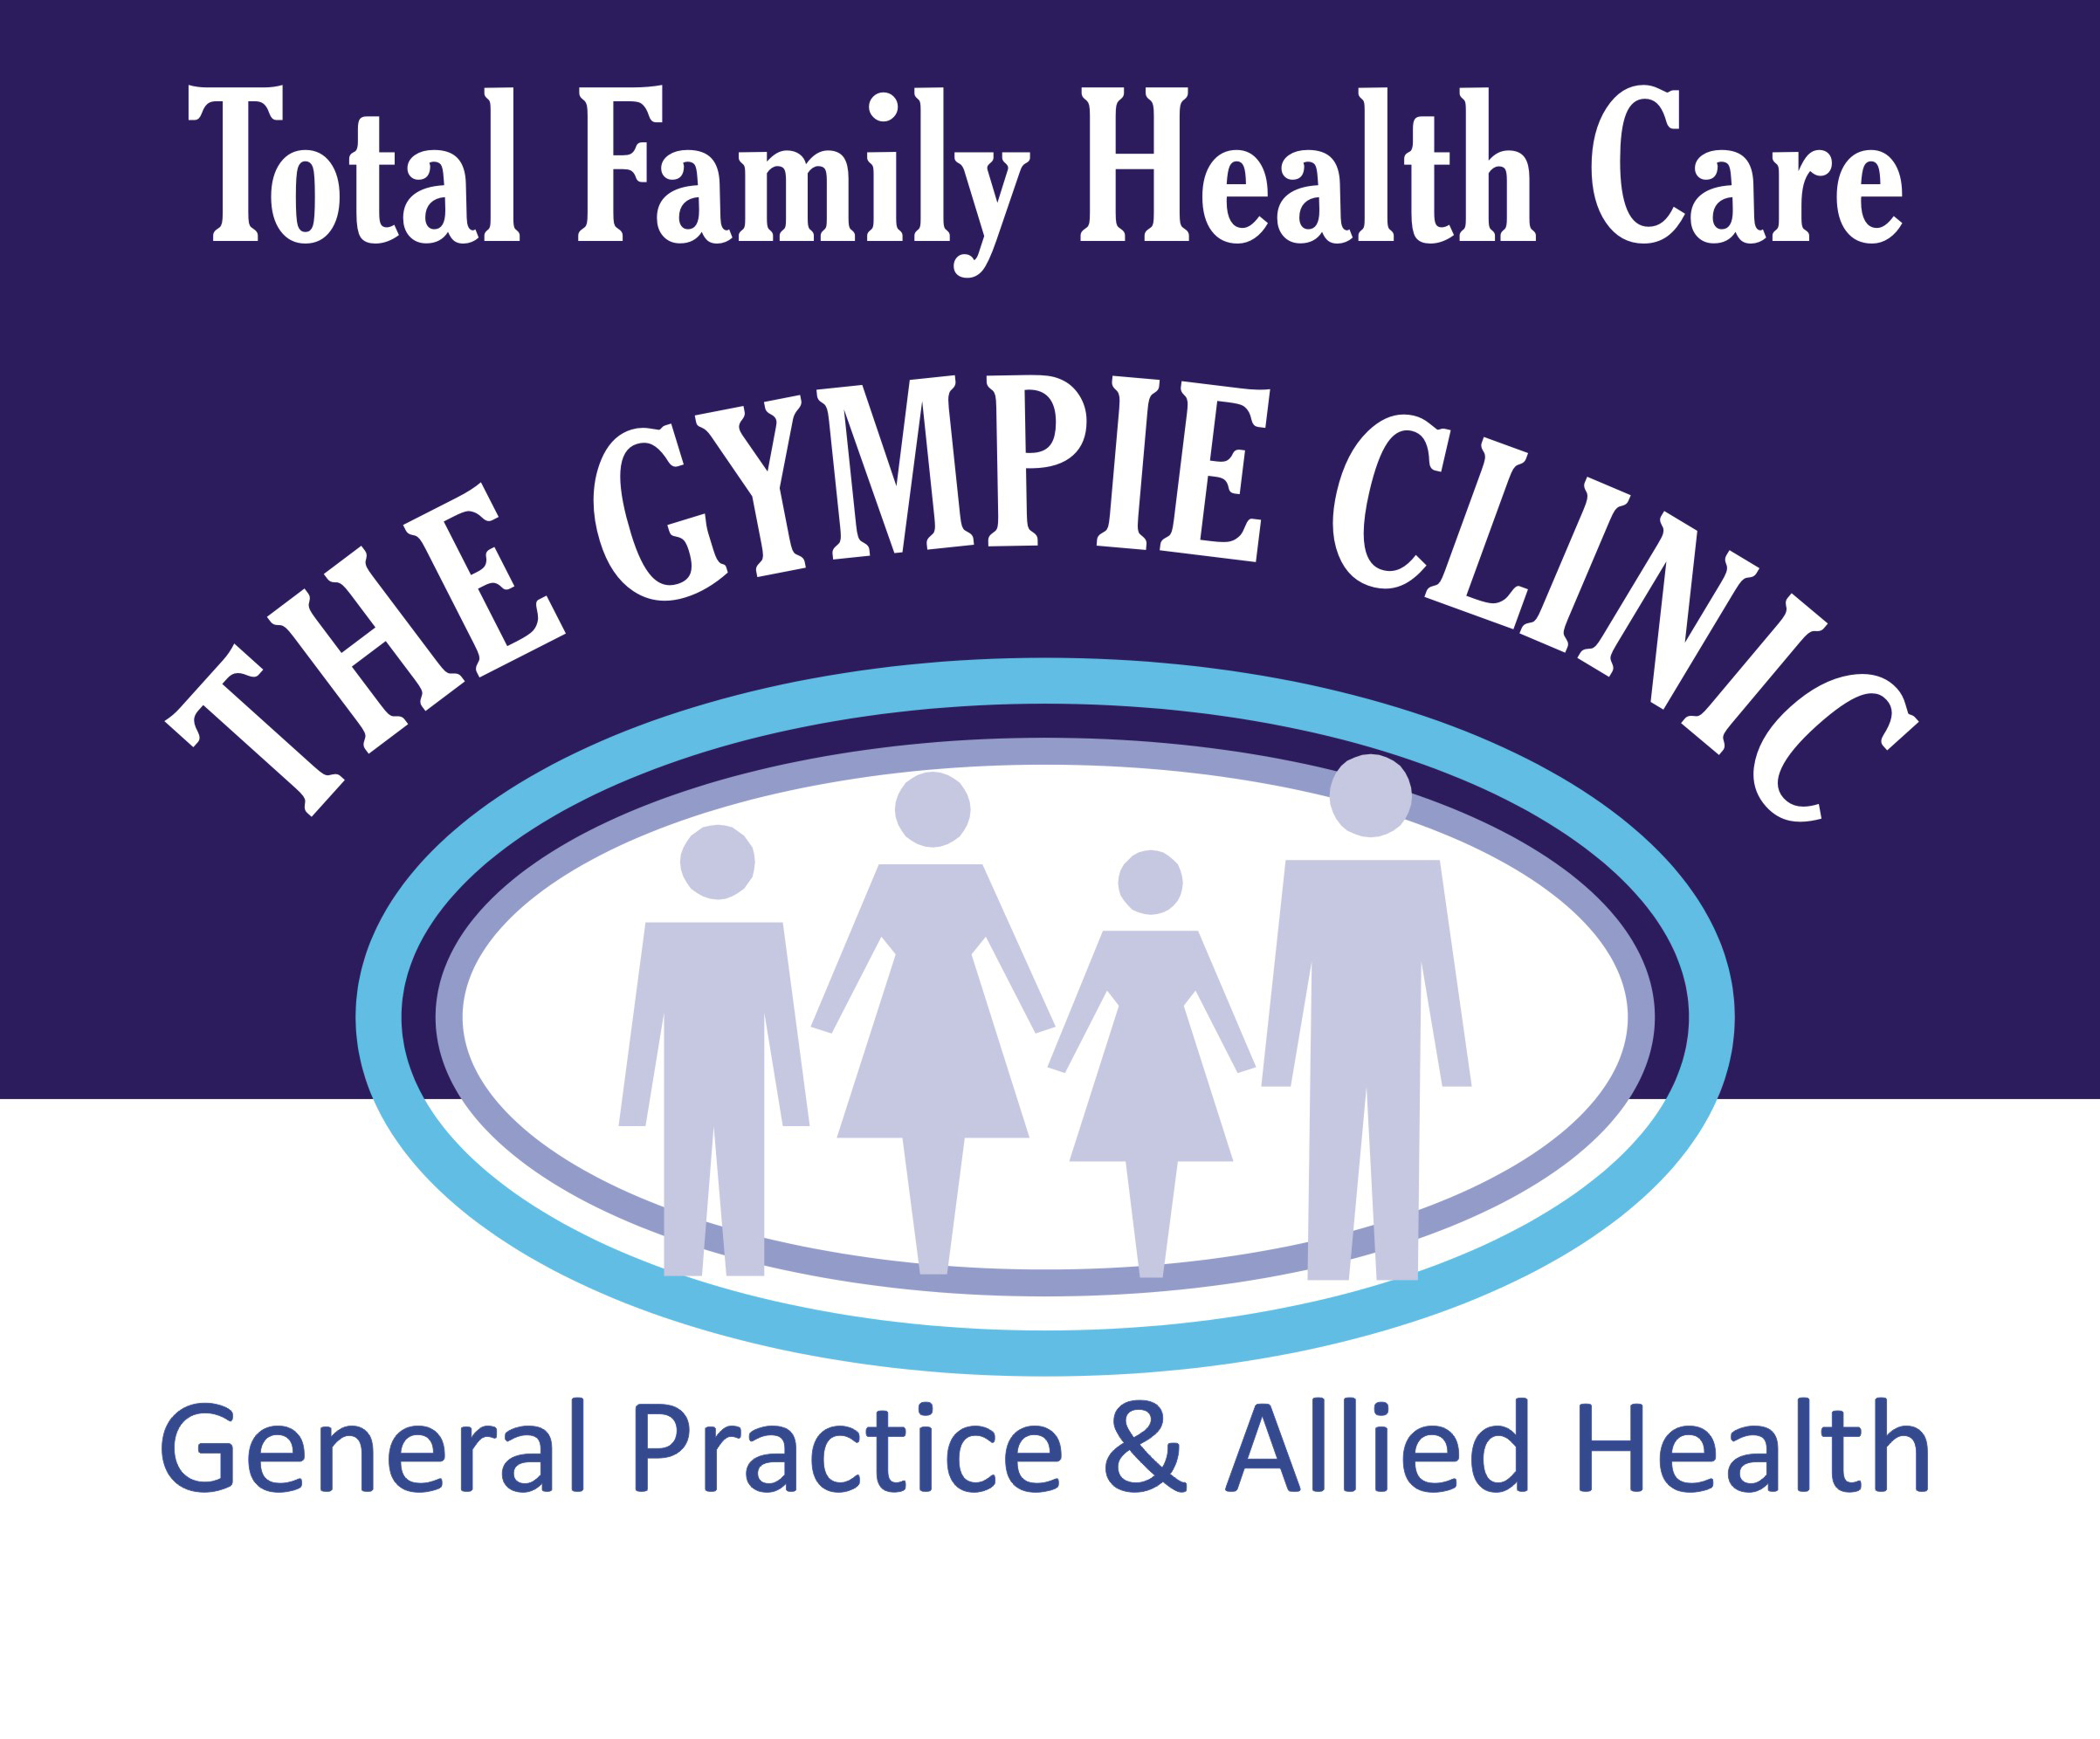 The Gympie Clinic